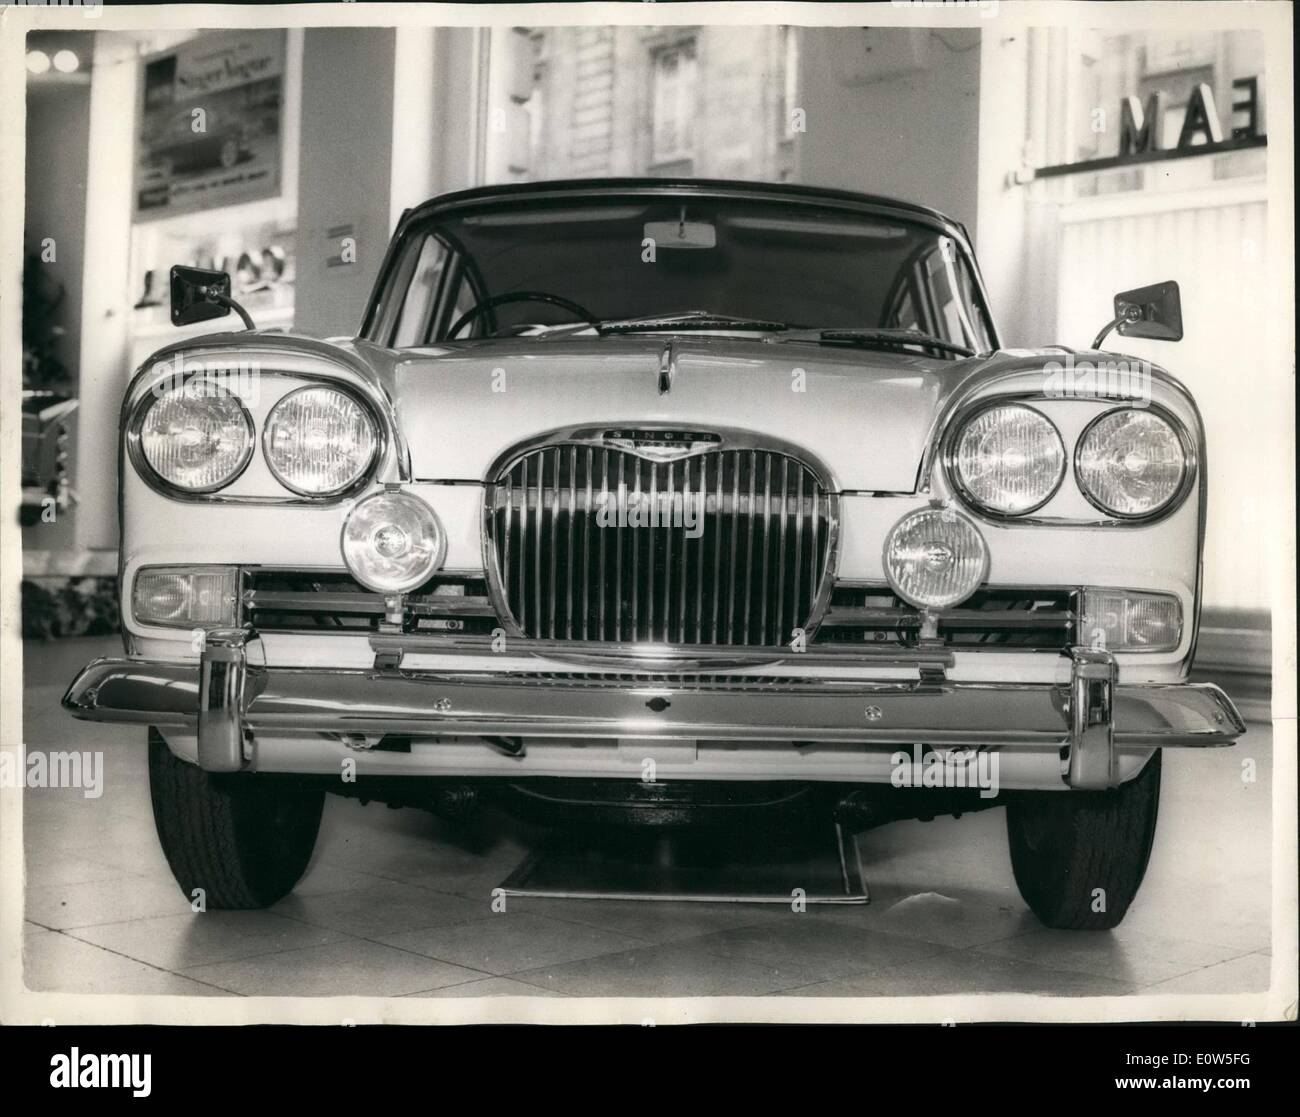 Jul. 07, 1961 - New car put on the market by the Rootes Group: A brand new, medium price luxury saloon - the Singer Vogue - was Stock Photo